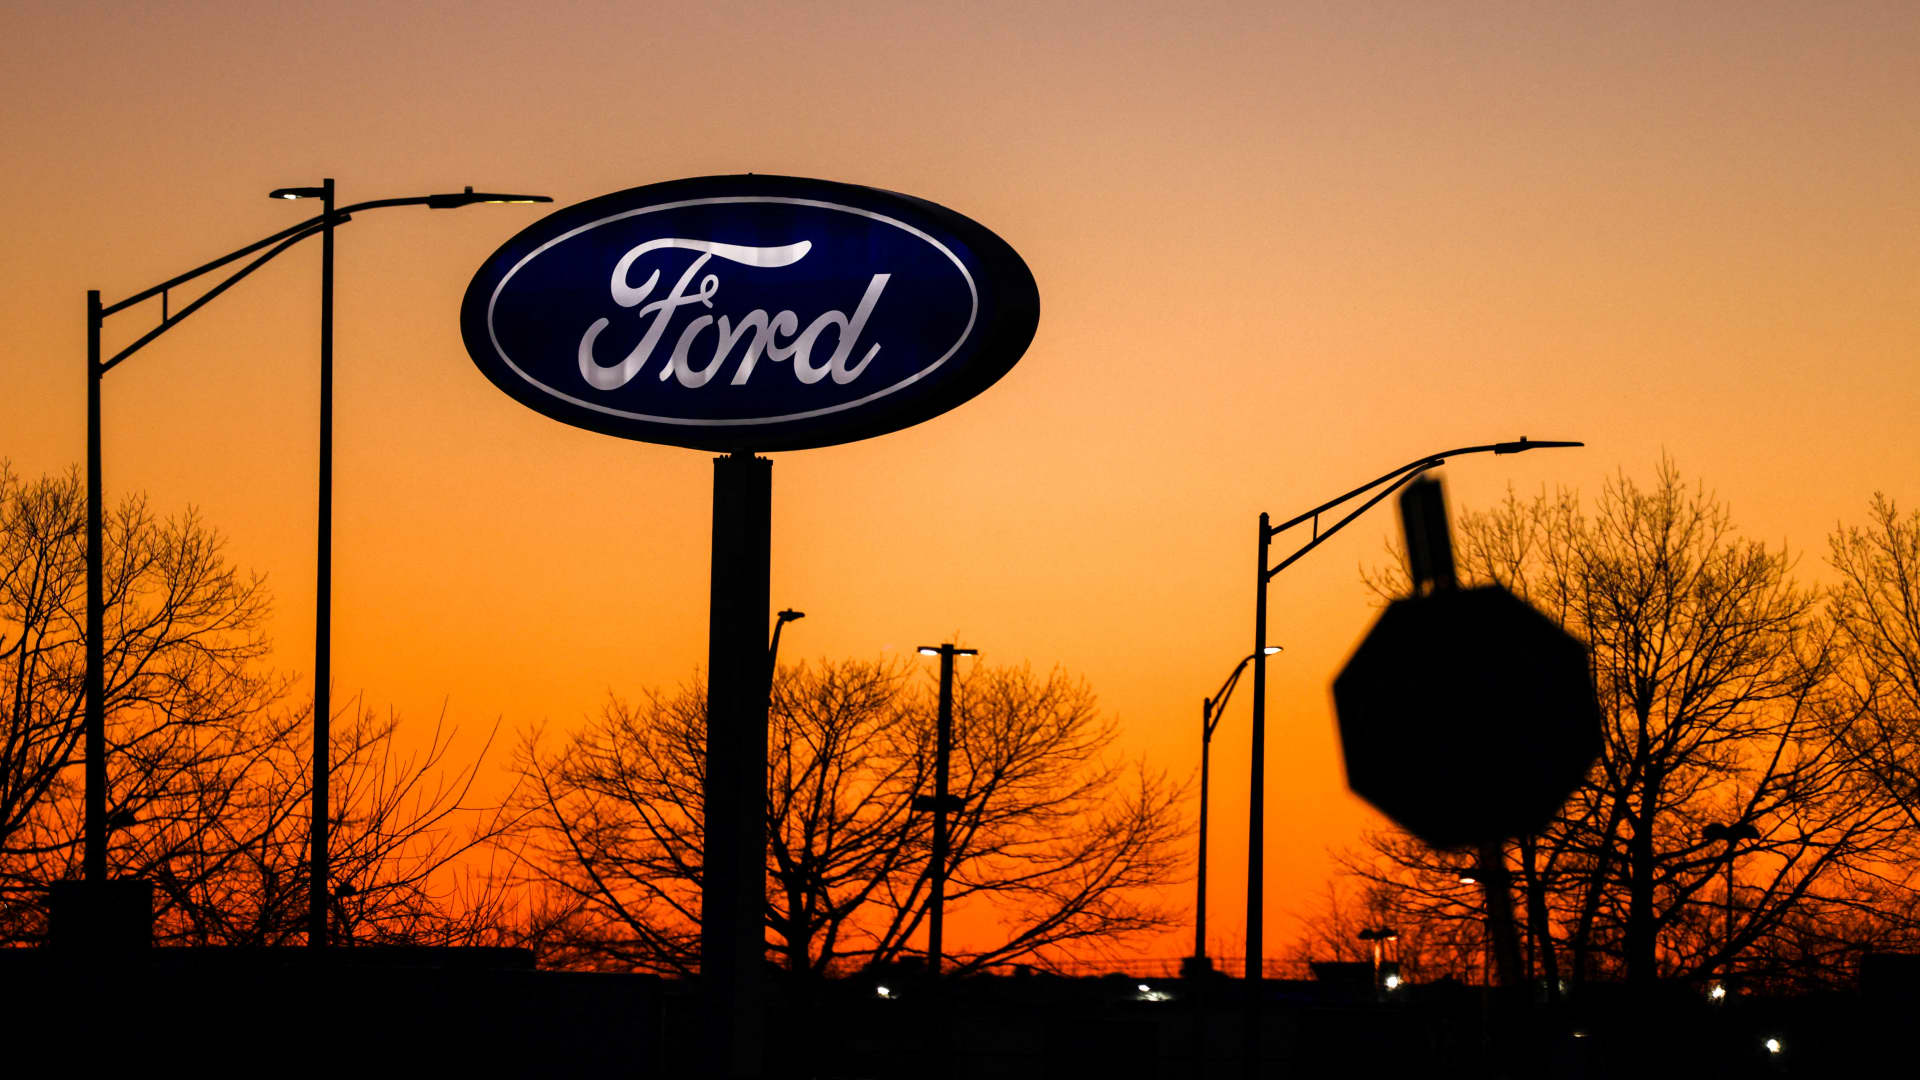 Jim Cramer sees Ford and Costco nearing buy levels. Here’s the story behind each Auto Recent